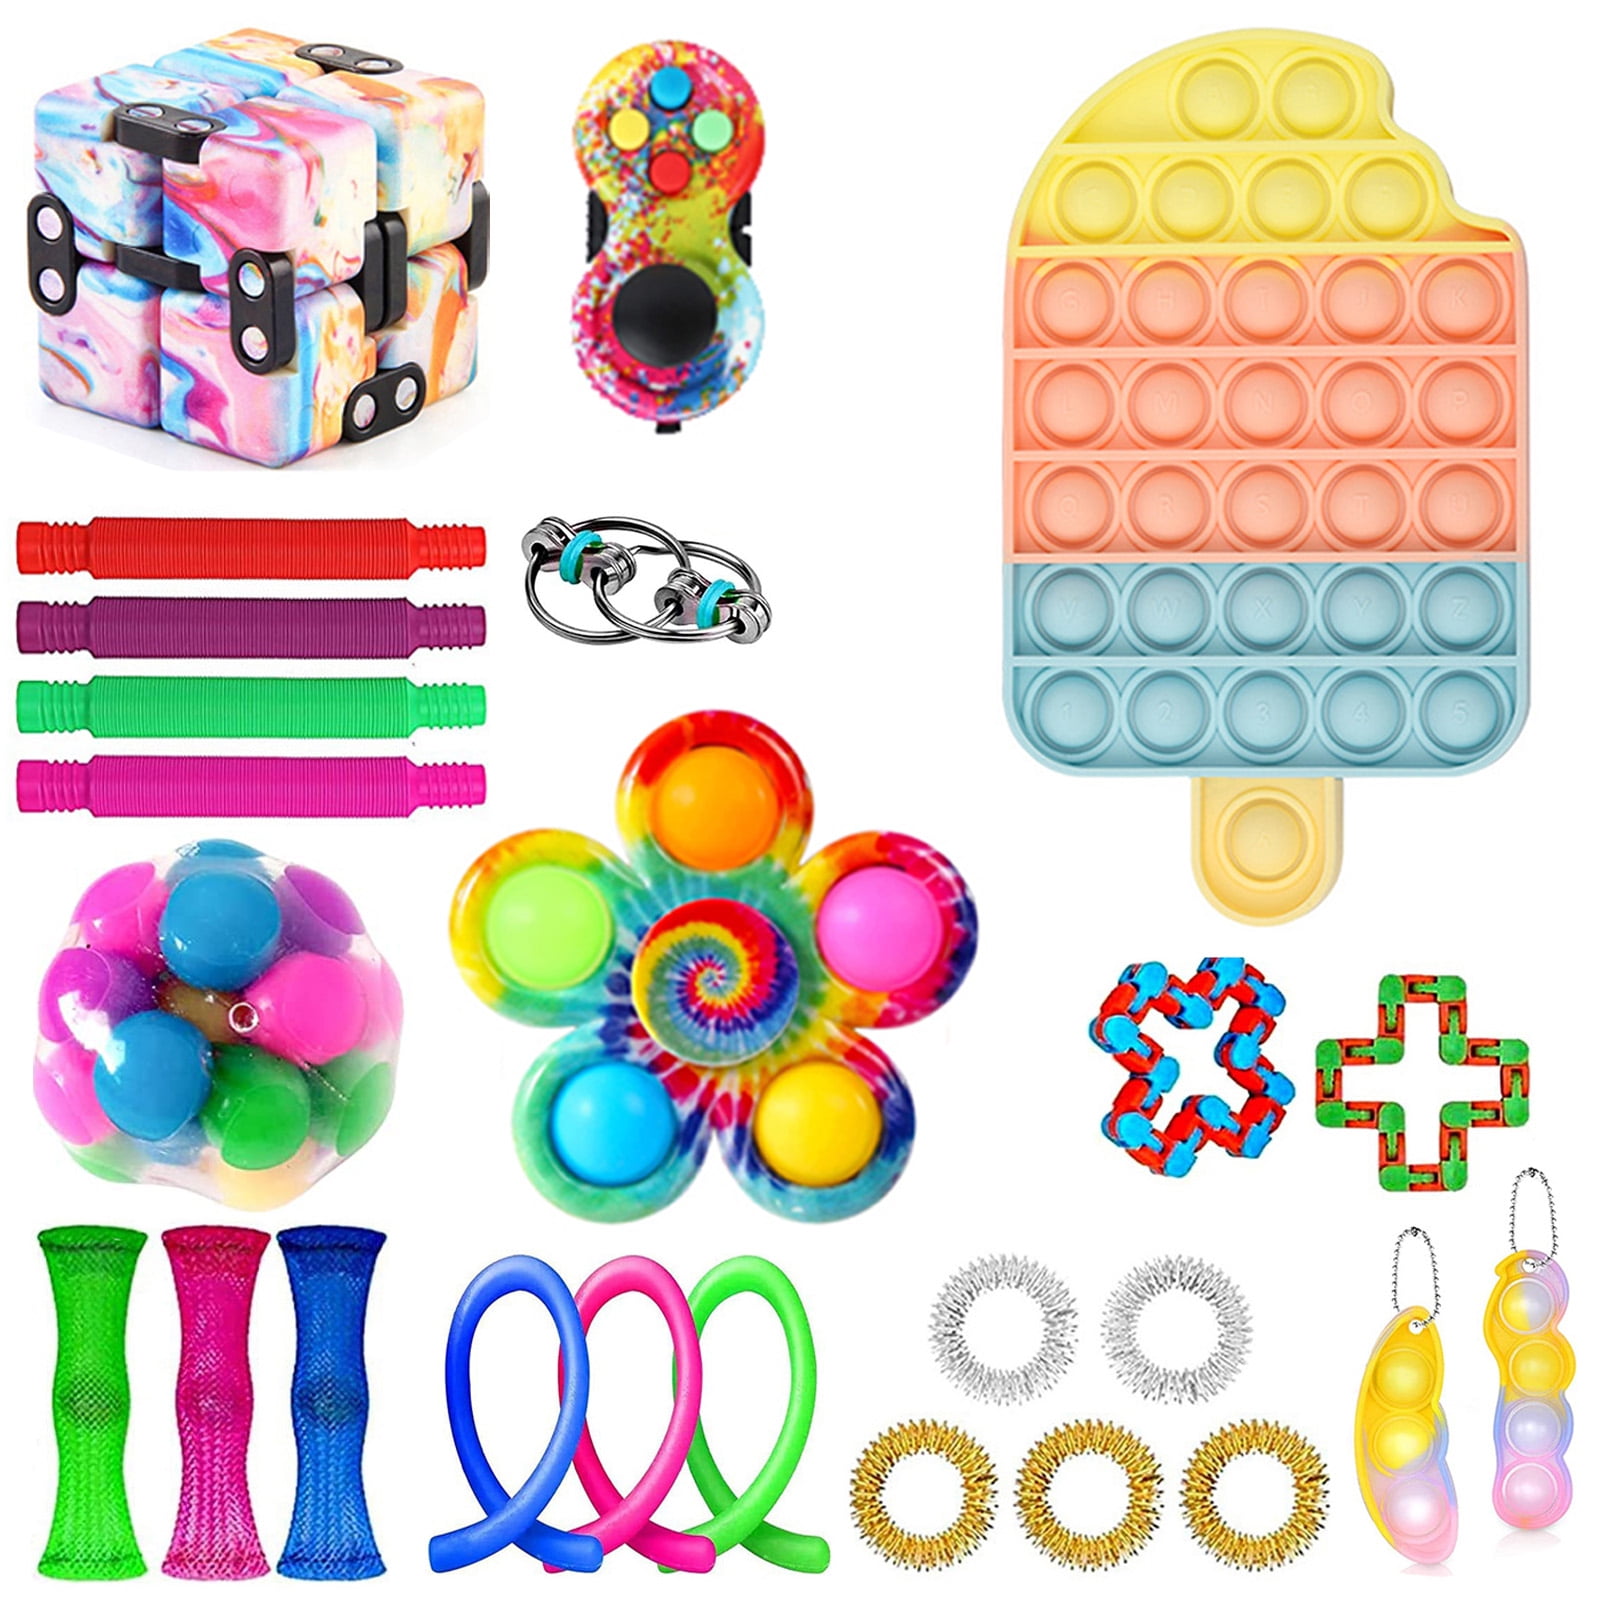 25Pcs Relieves Stress and Anxiety Fidget Toy,Stress Relieves Toy Assortment Set,Special Fidget Toys for Kids and Adults Birthday Party Favors Random Color Cocoa Sensory Fidget Toys Set